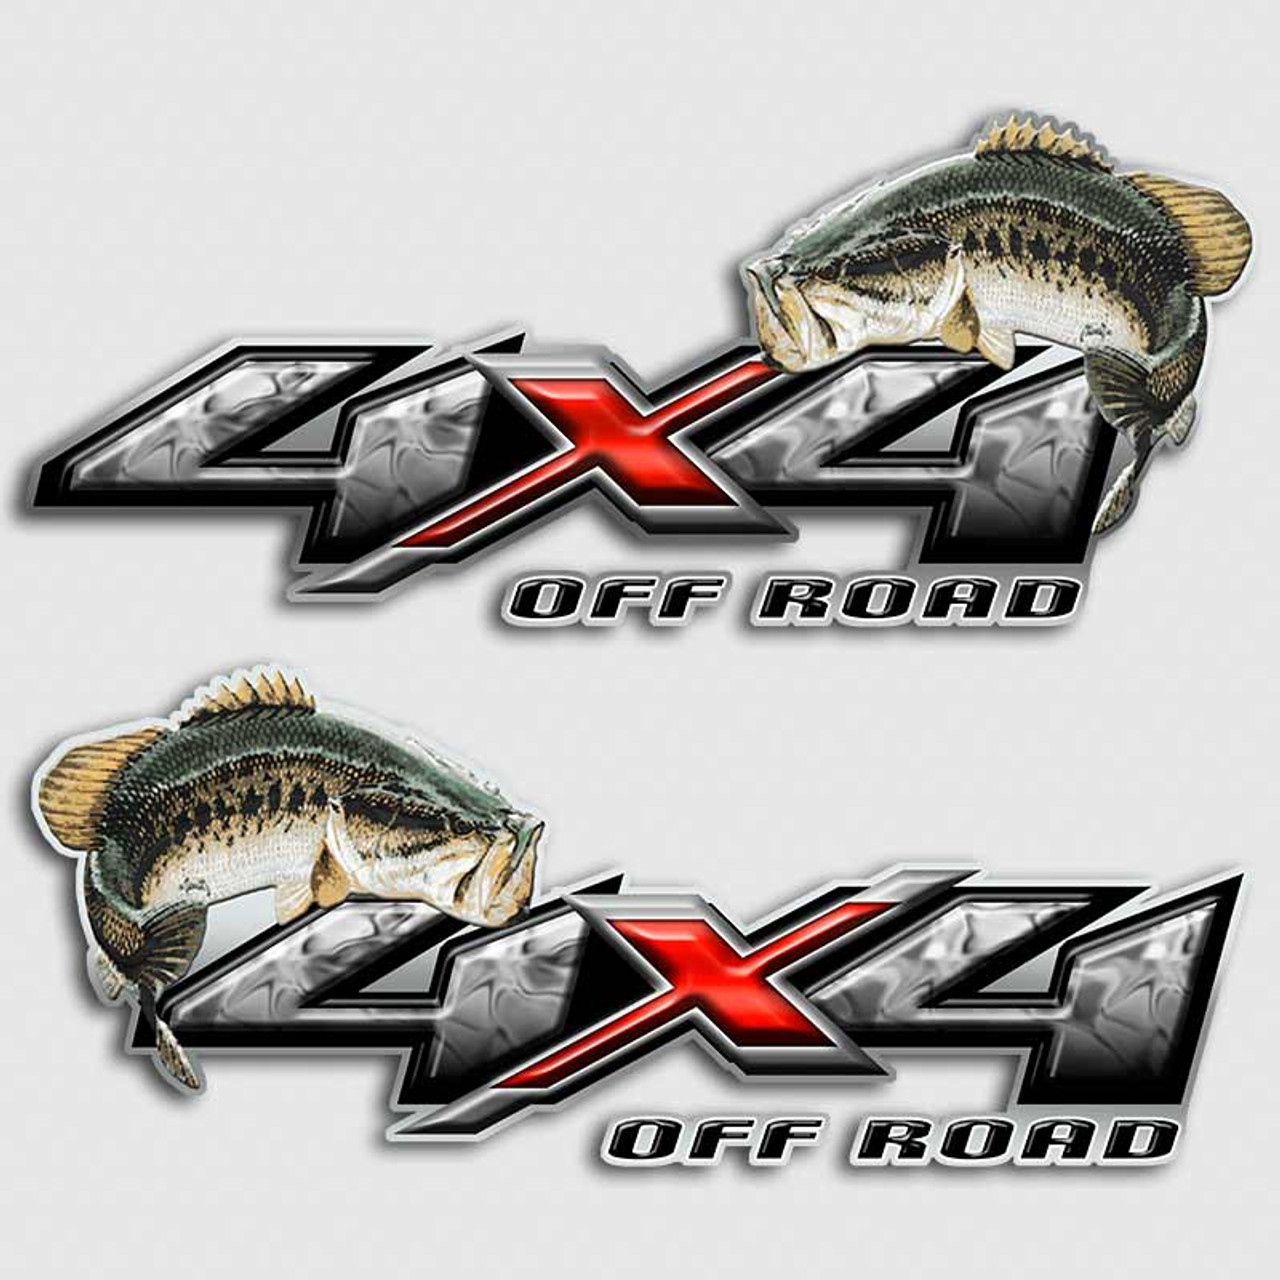 4x4 Bass Fishing Truck Decal Set | Off Road Chevy Fish ...